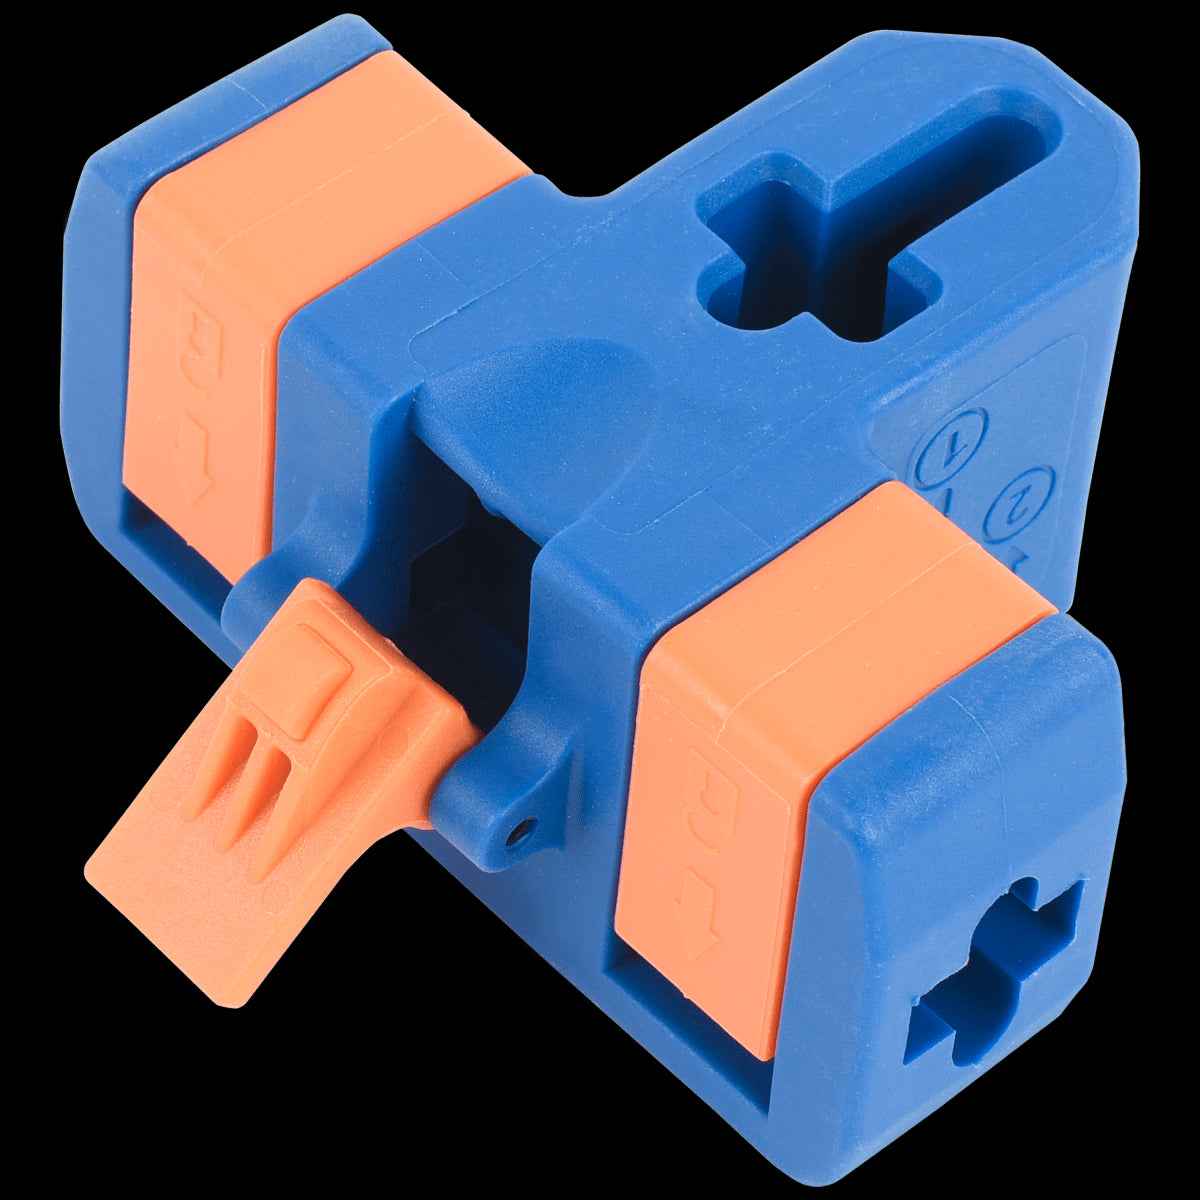 CONNECTOR FOR DEXTER CLAMPS